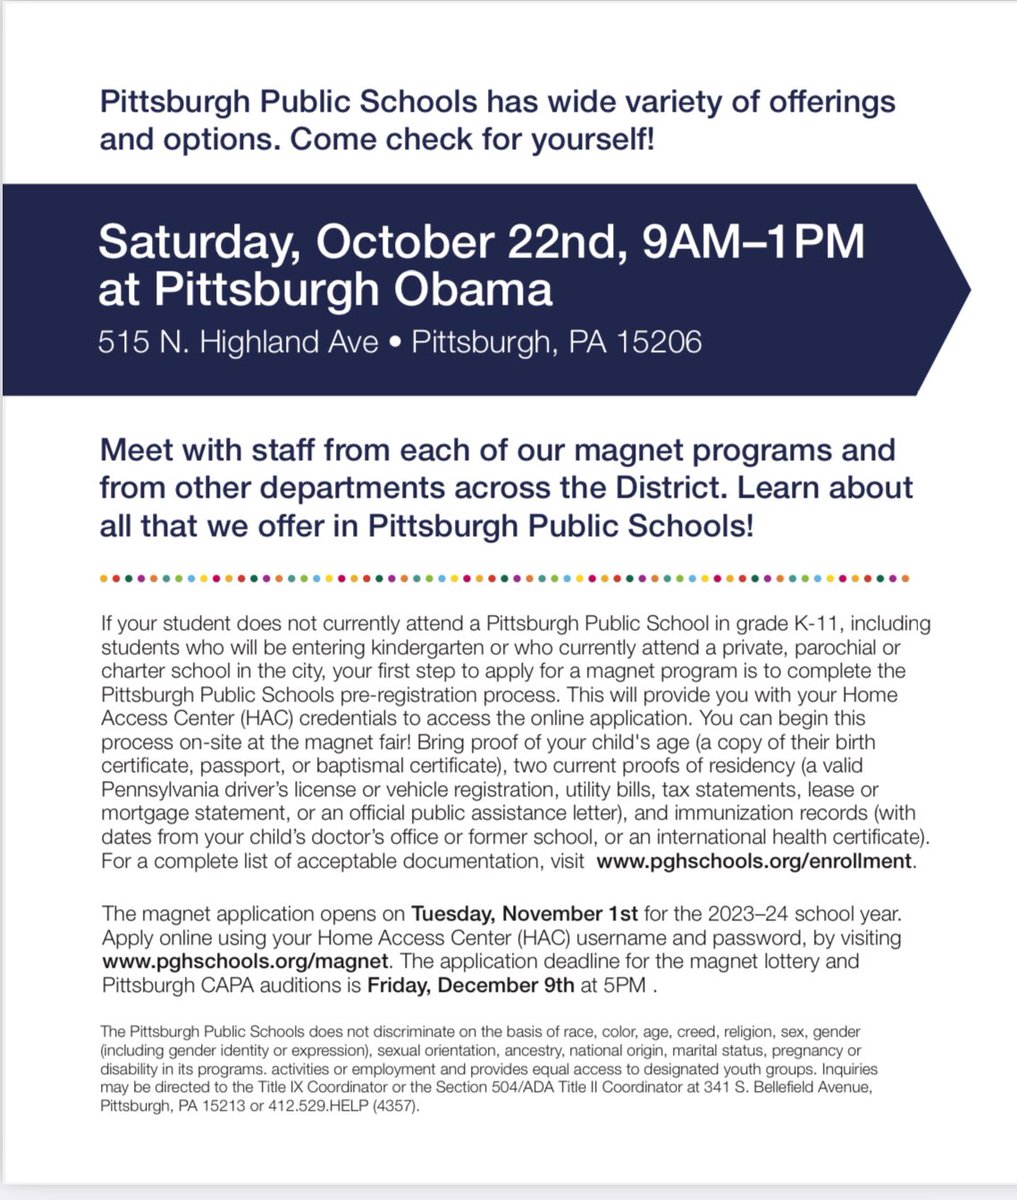 Today is the day for the PPS Magnet Fair today at Barack Obama Academy of International Studies 6-12 located at 515 N. Highland Ave from 9am-1pm. Meet with staff and get more information about all of the magnet programs we offer!